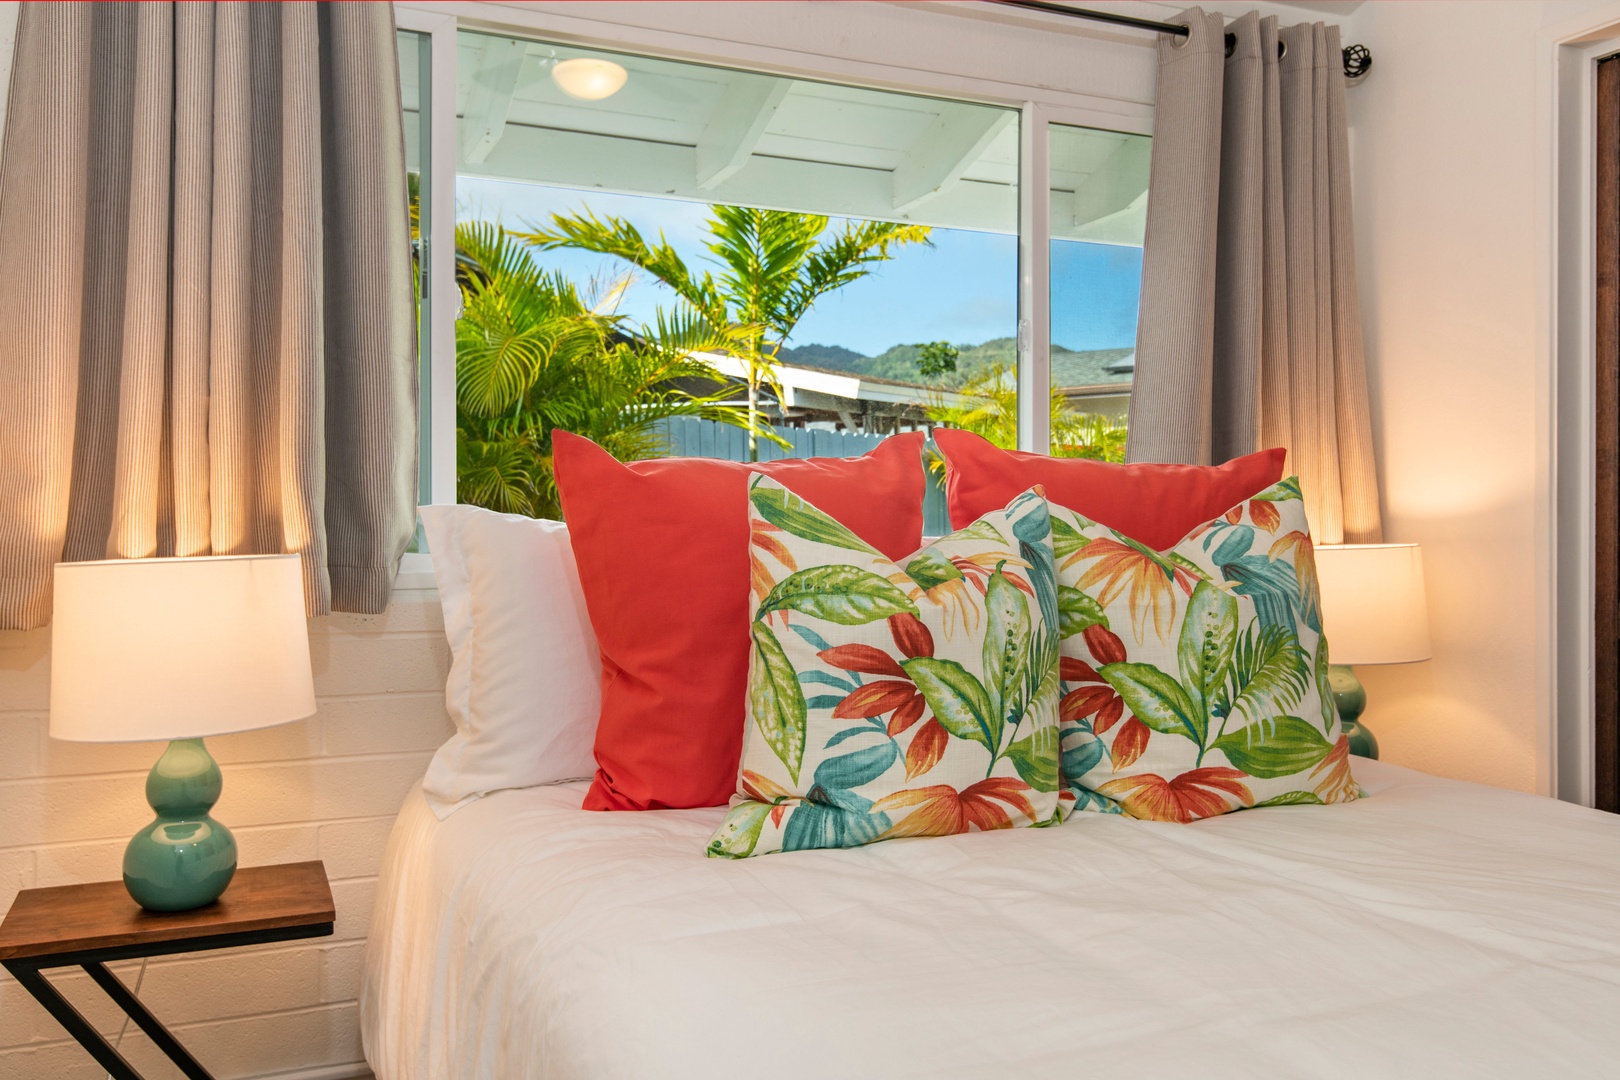 Honolulu Vacation Rentals, Holoholo Hale - Bedroom 2 - Queen bed, split ac with back yard garden and jacuzzi views.